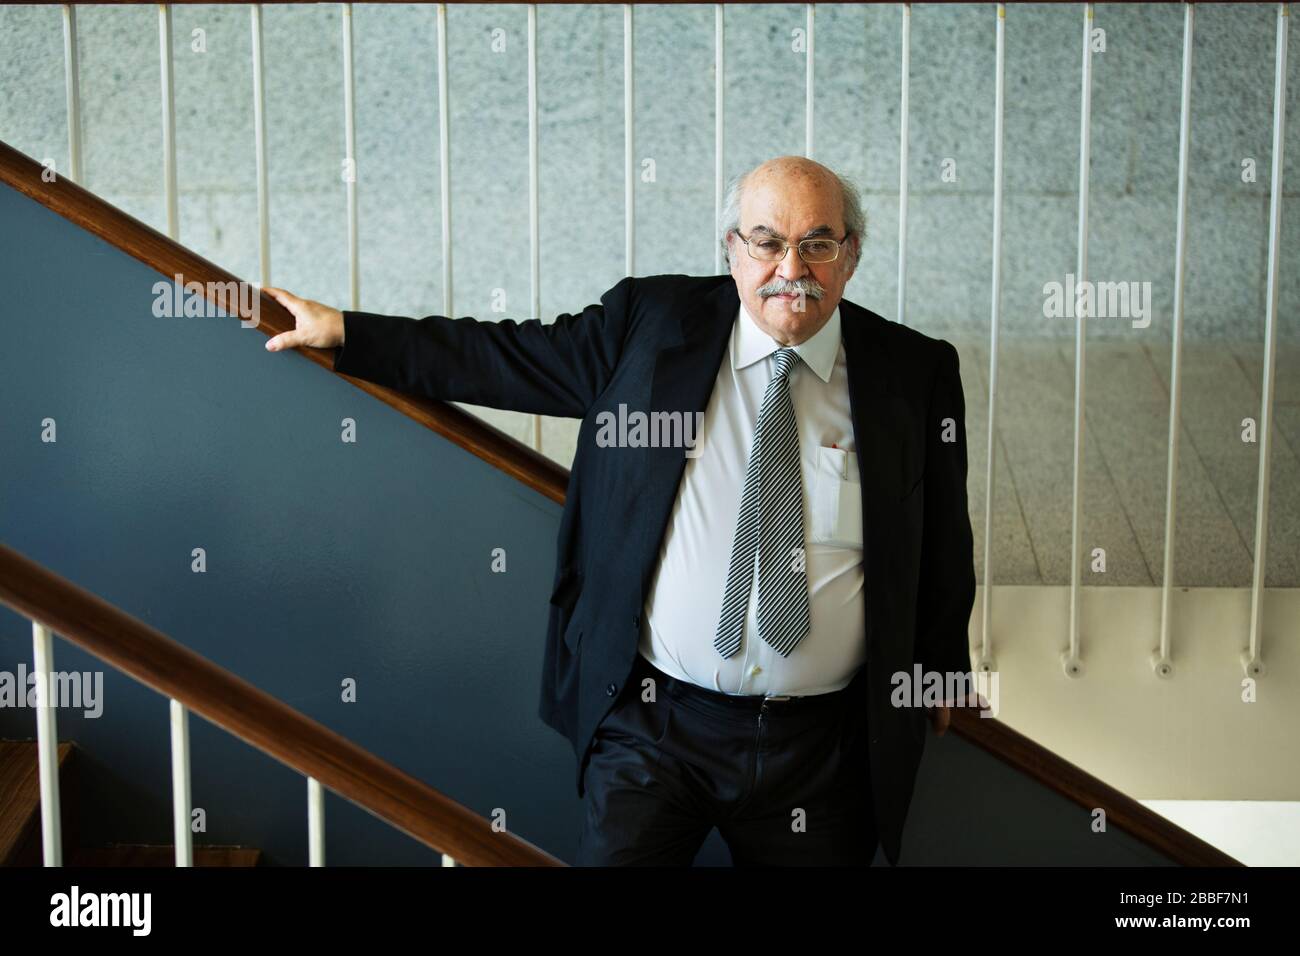 Andreu Mas-Colell is a catalan economist, an expert in microeconomics and one of the world's leading mathematical economists. Stock Photo